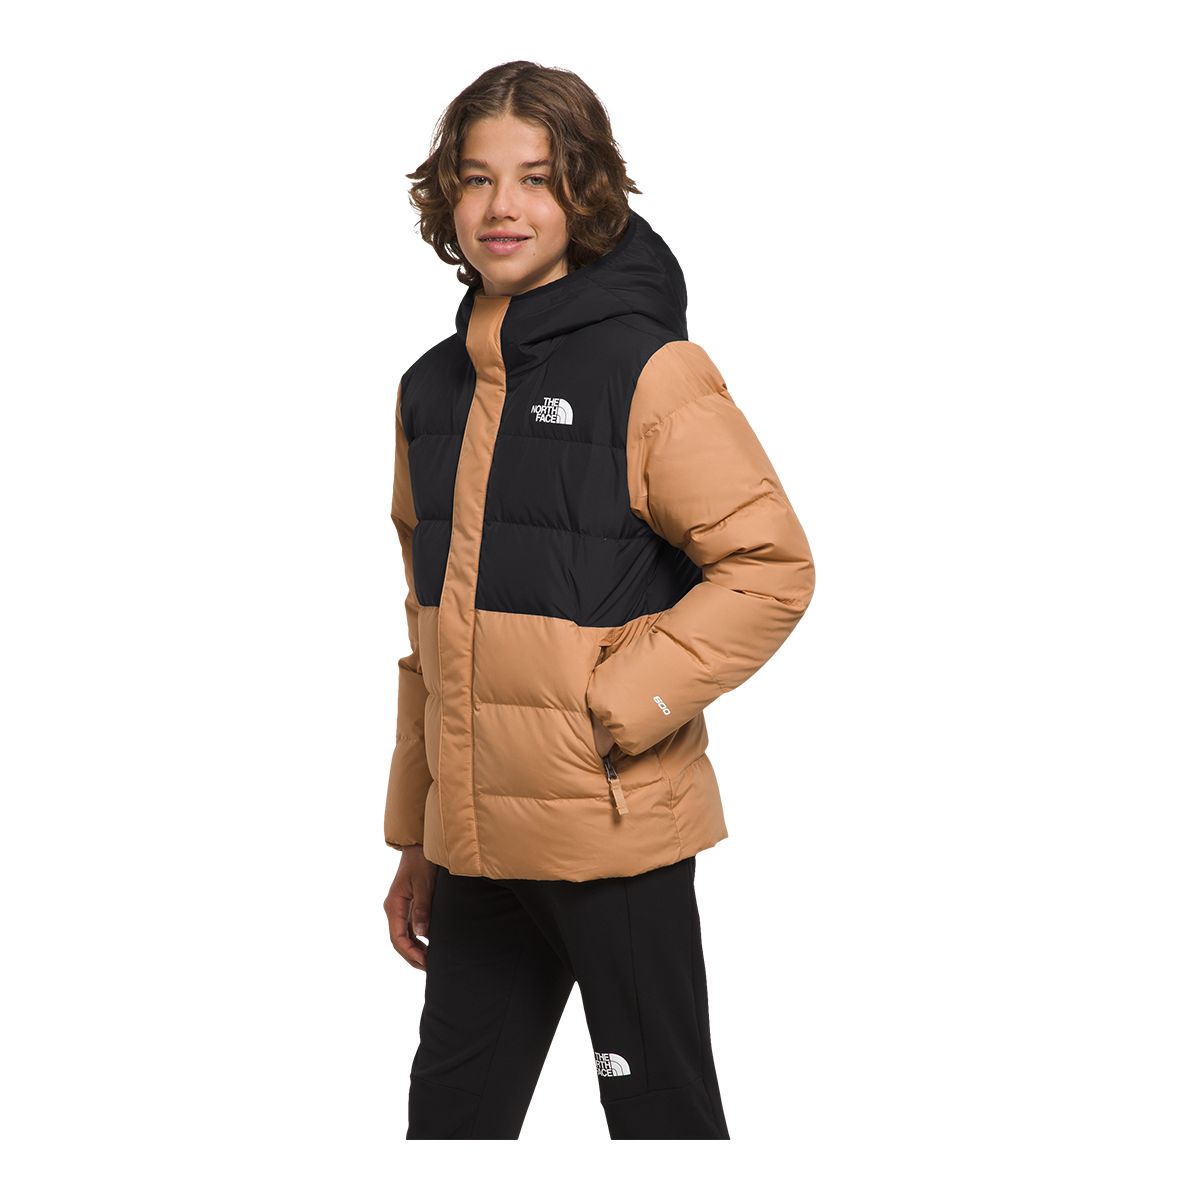 The North Face Boys' North Down Fleece Lined Jacket